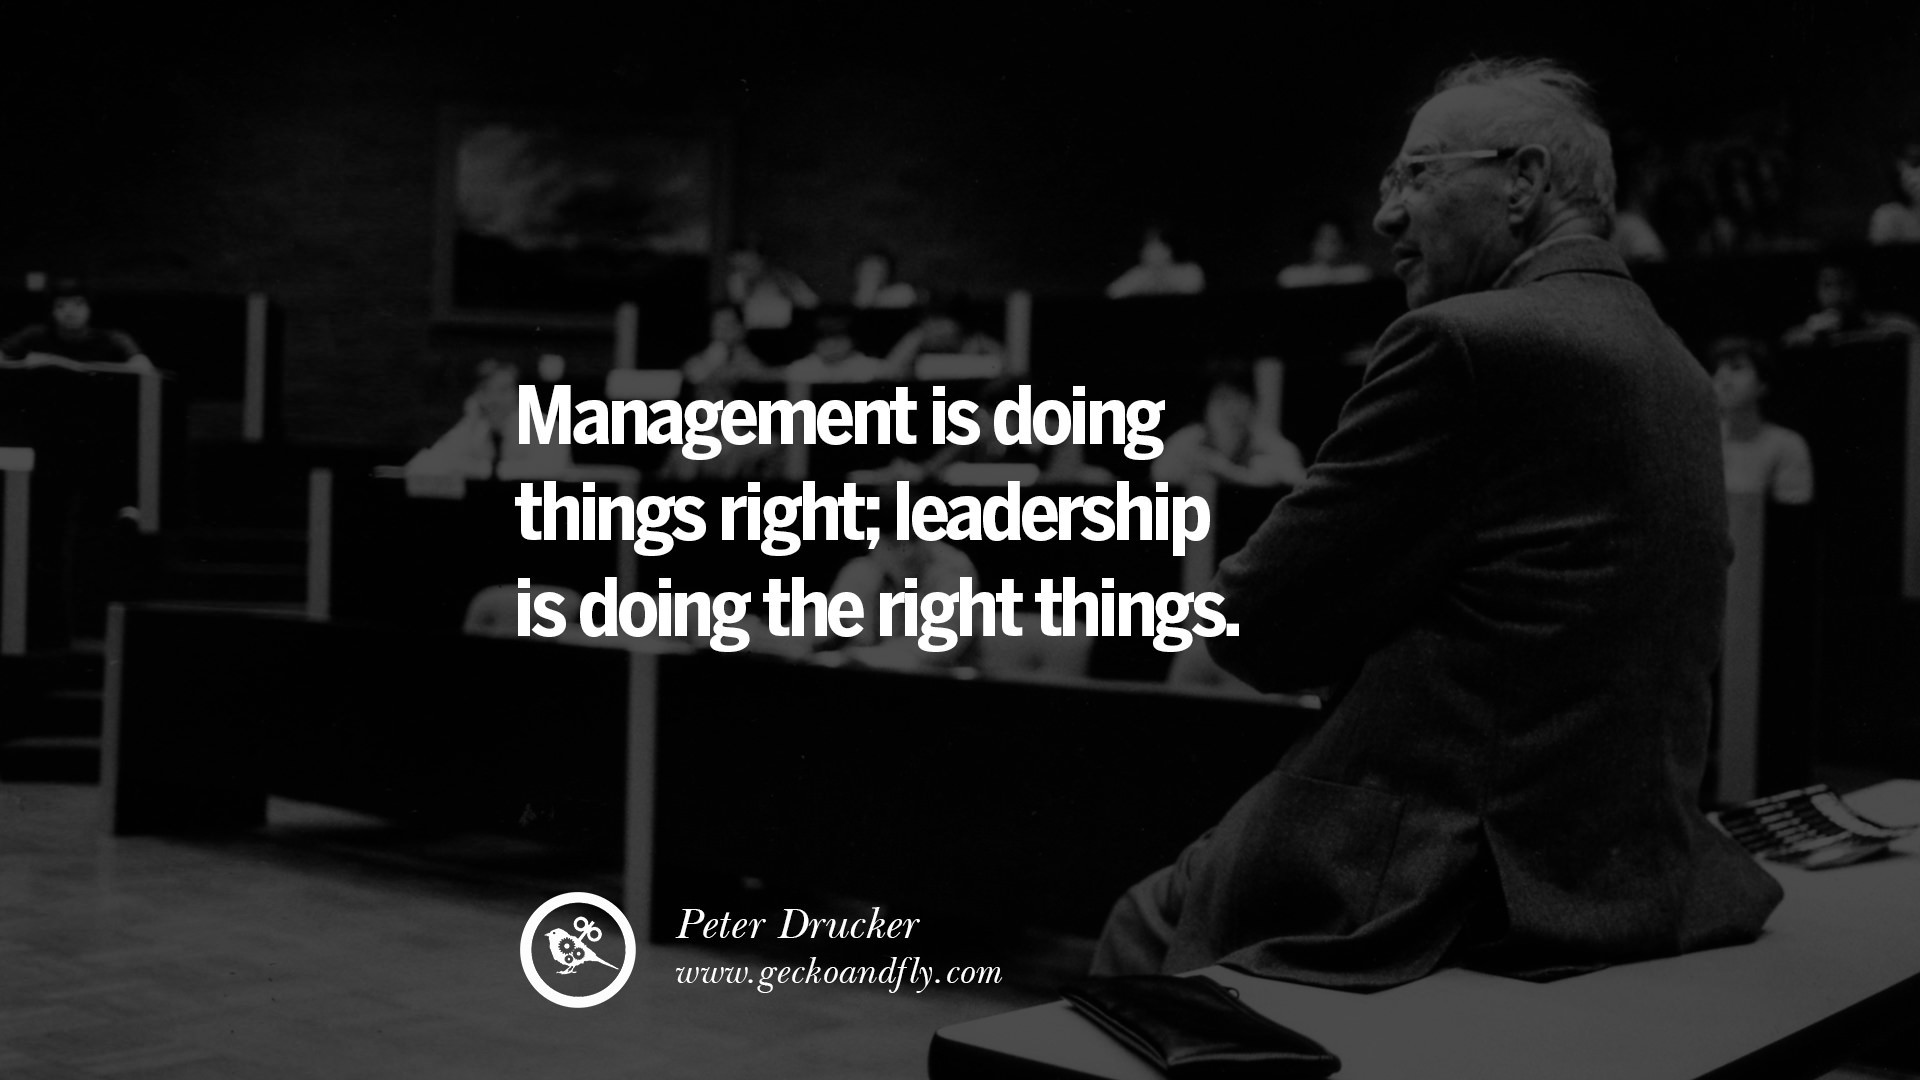 Manager Quotes Inspirational
 22 Uplifting and Motivational Quotes on Management Leadership